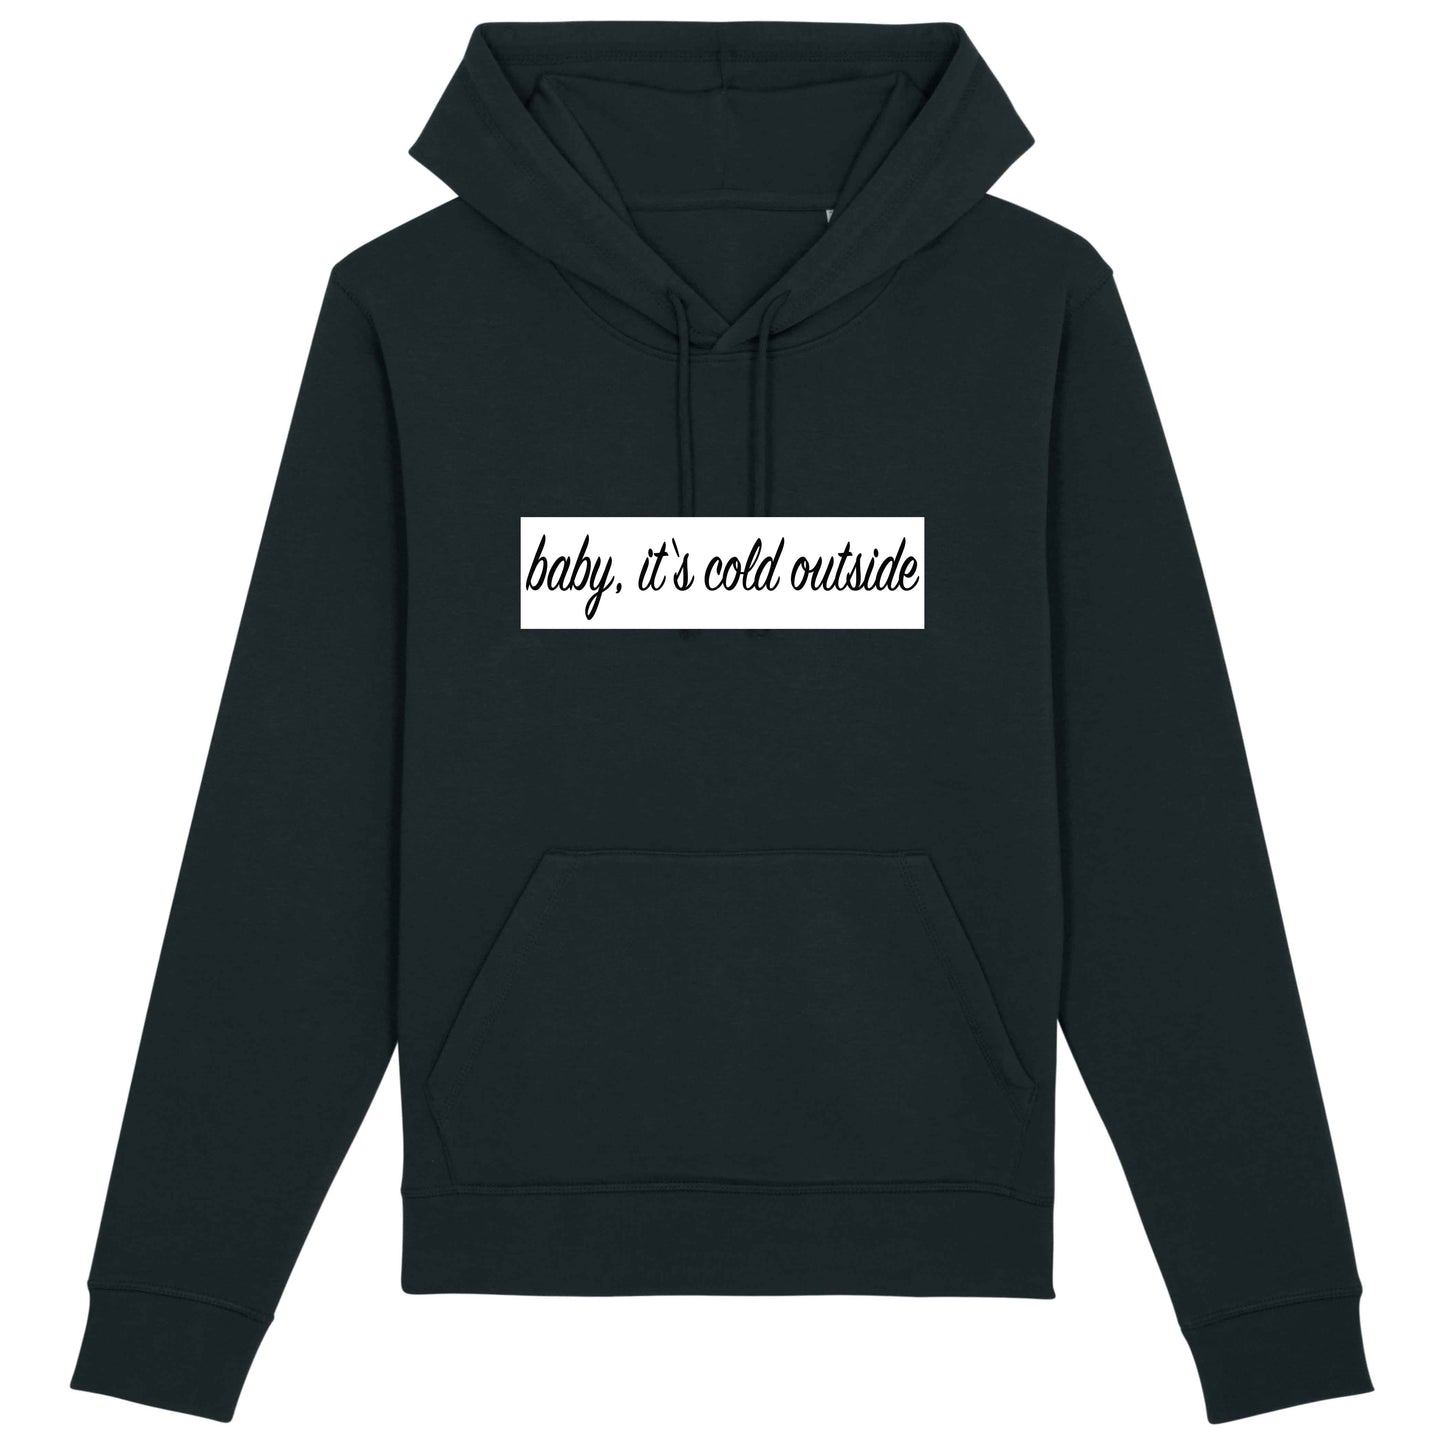 Baby it's cold outside - Unisex Organic Hoodie